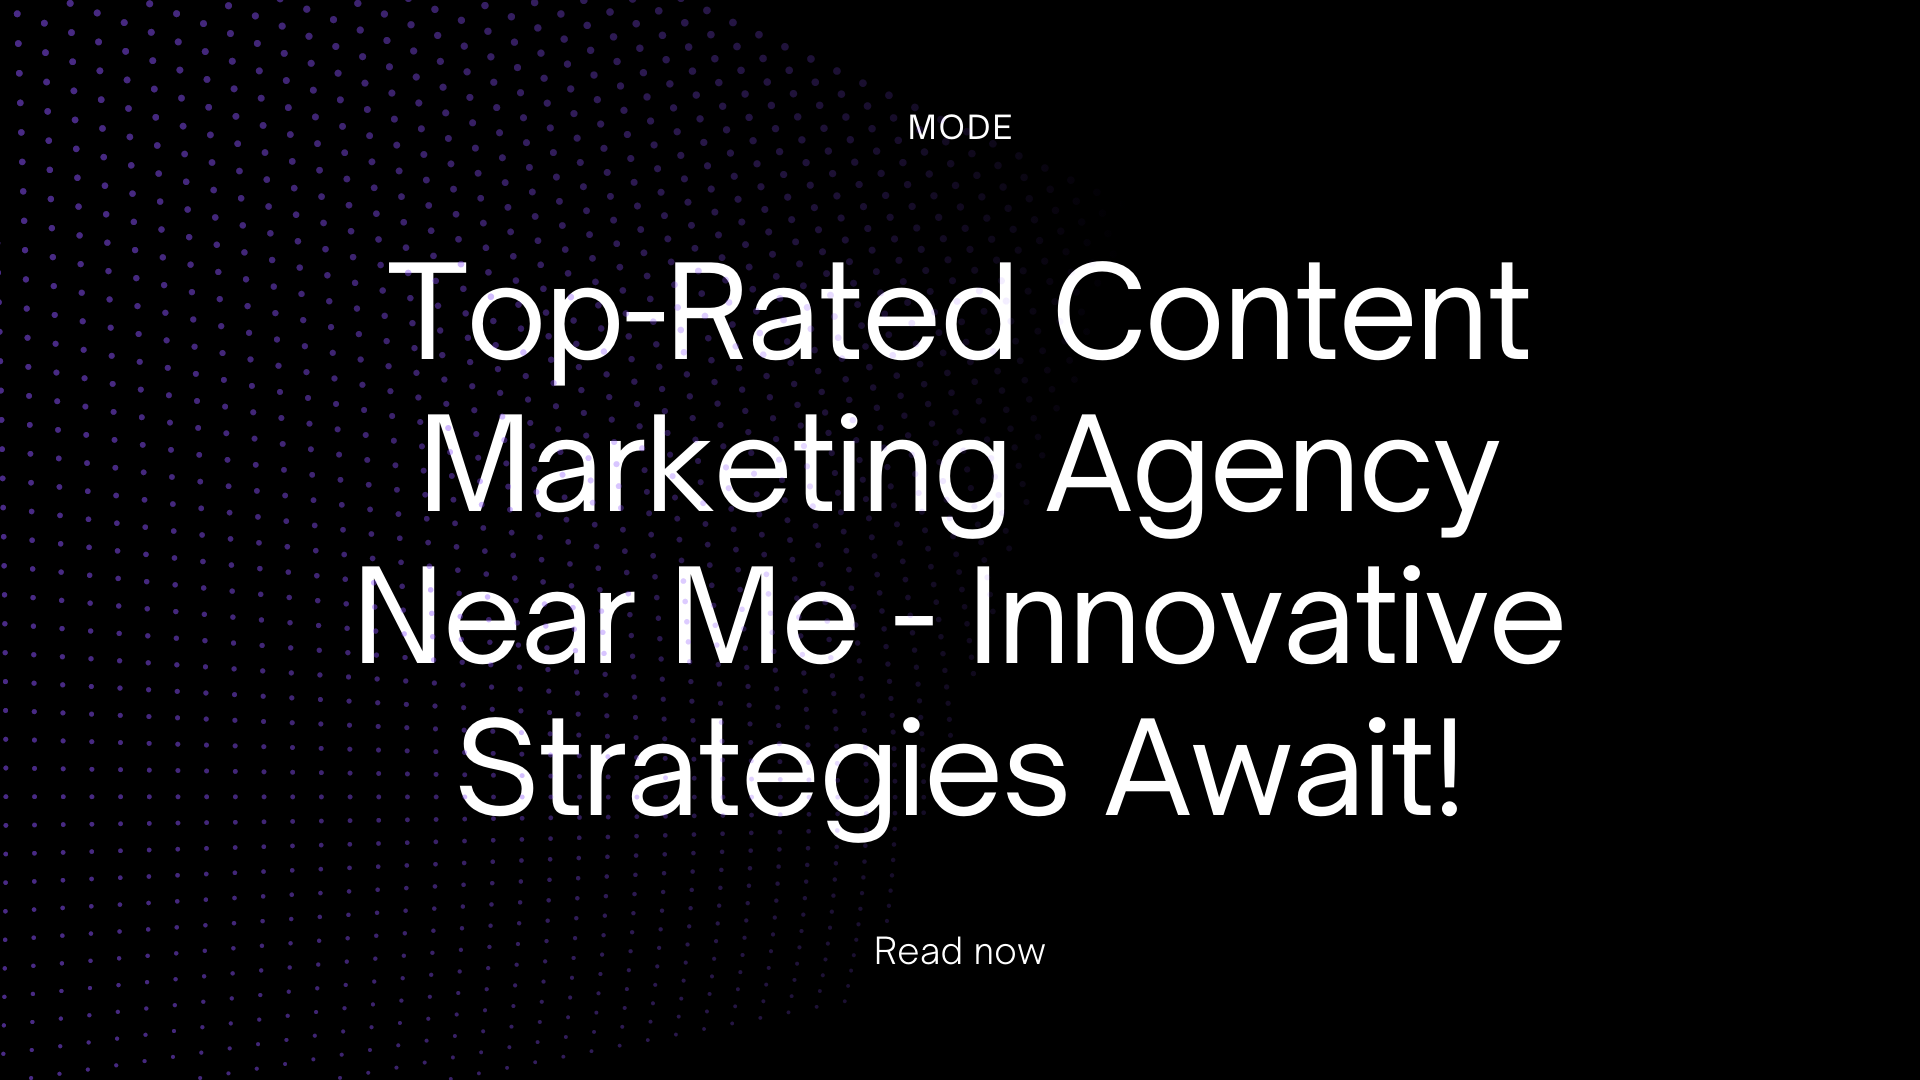 Top-Rated Content Marketing Agency Near Me - Innovative Strategies Await!